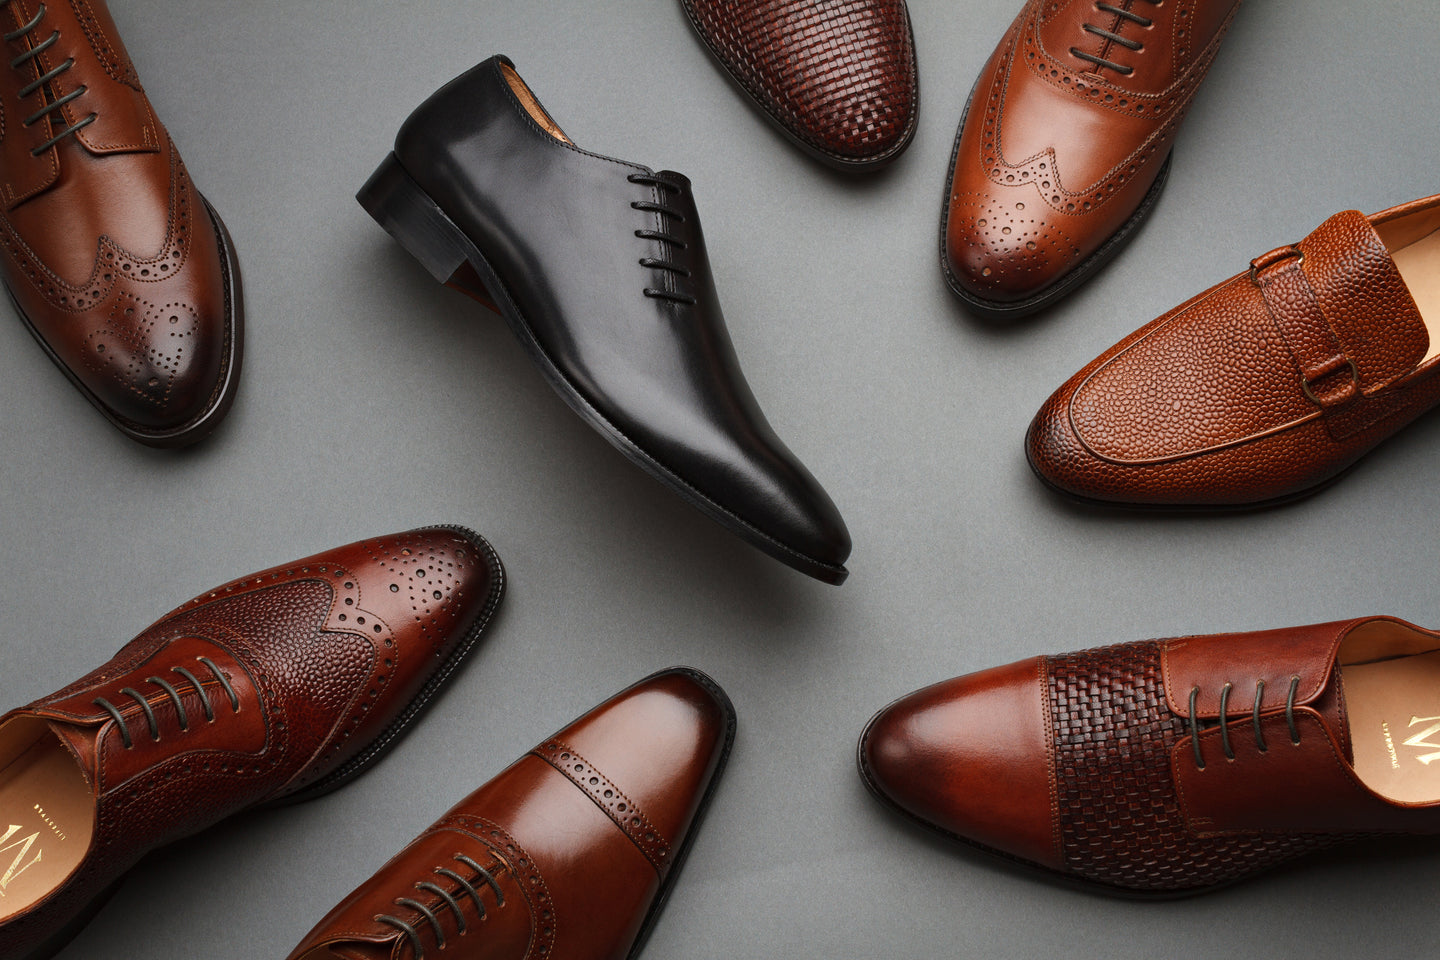 3DM Lifestyle - Handcrafted Leather Shoes